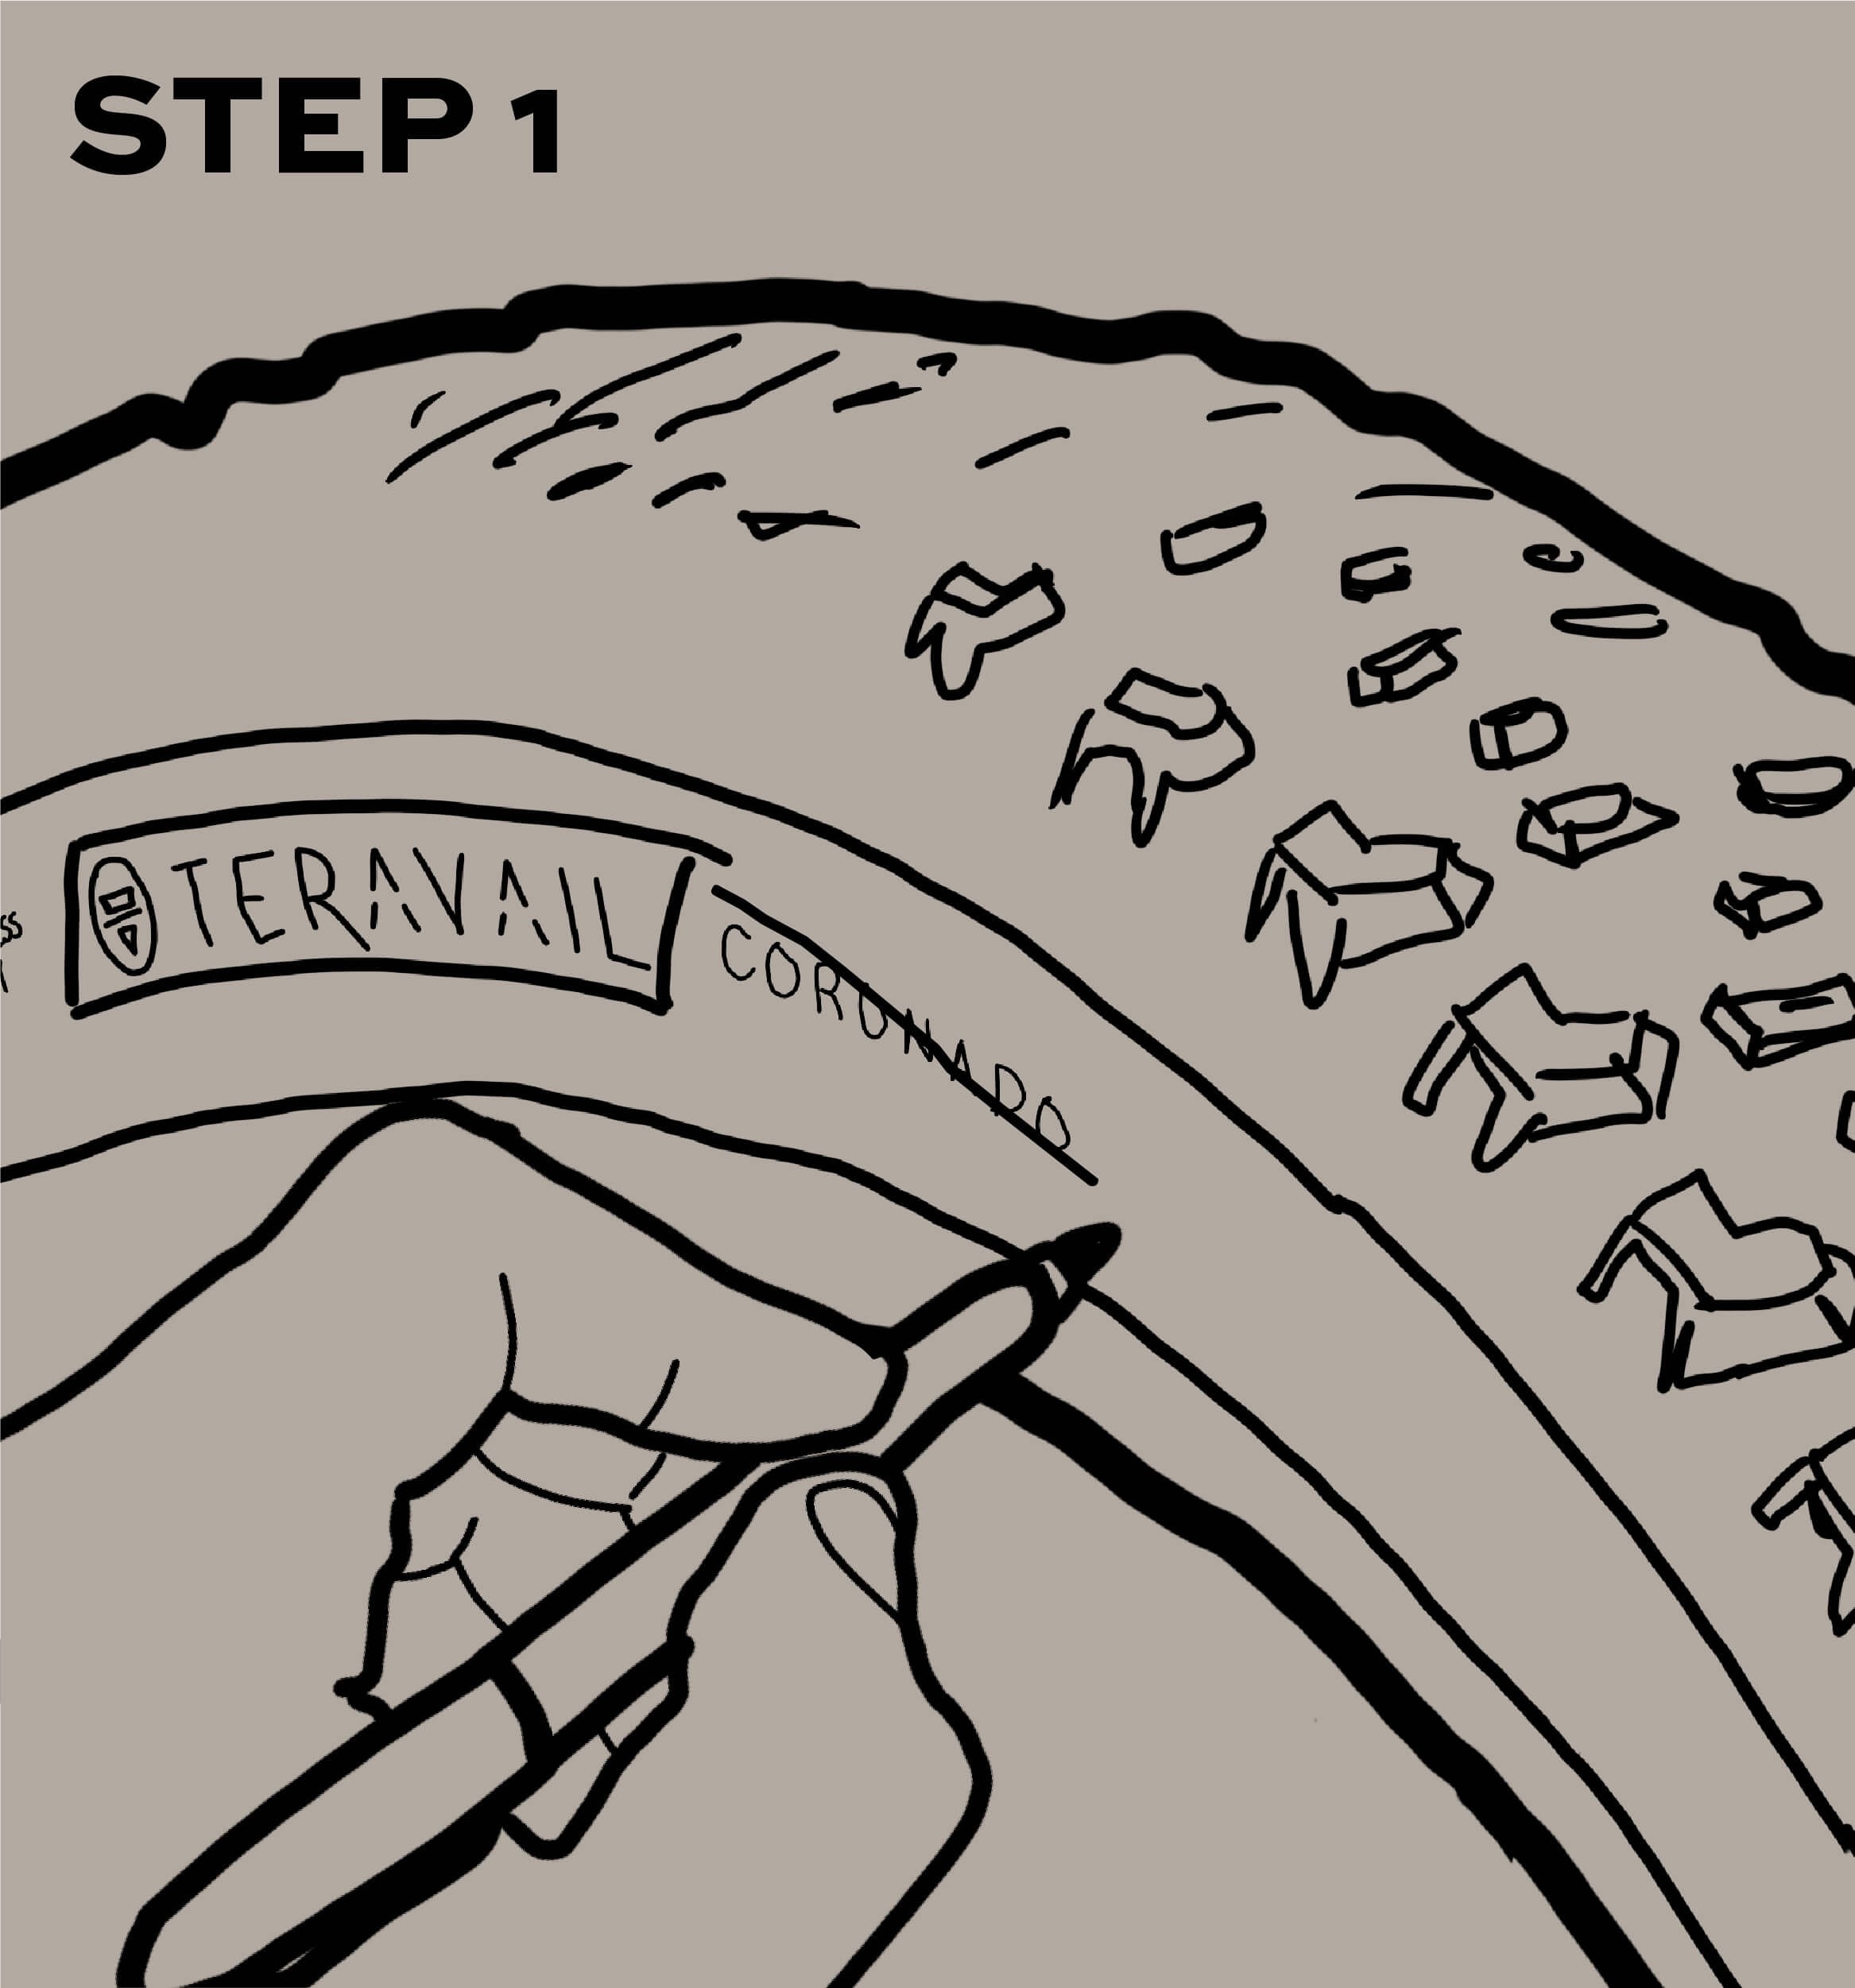 A digital illustration showing step 1, which is crossing out the name "Coronado" on the tire